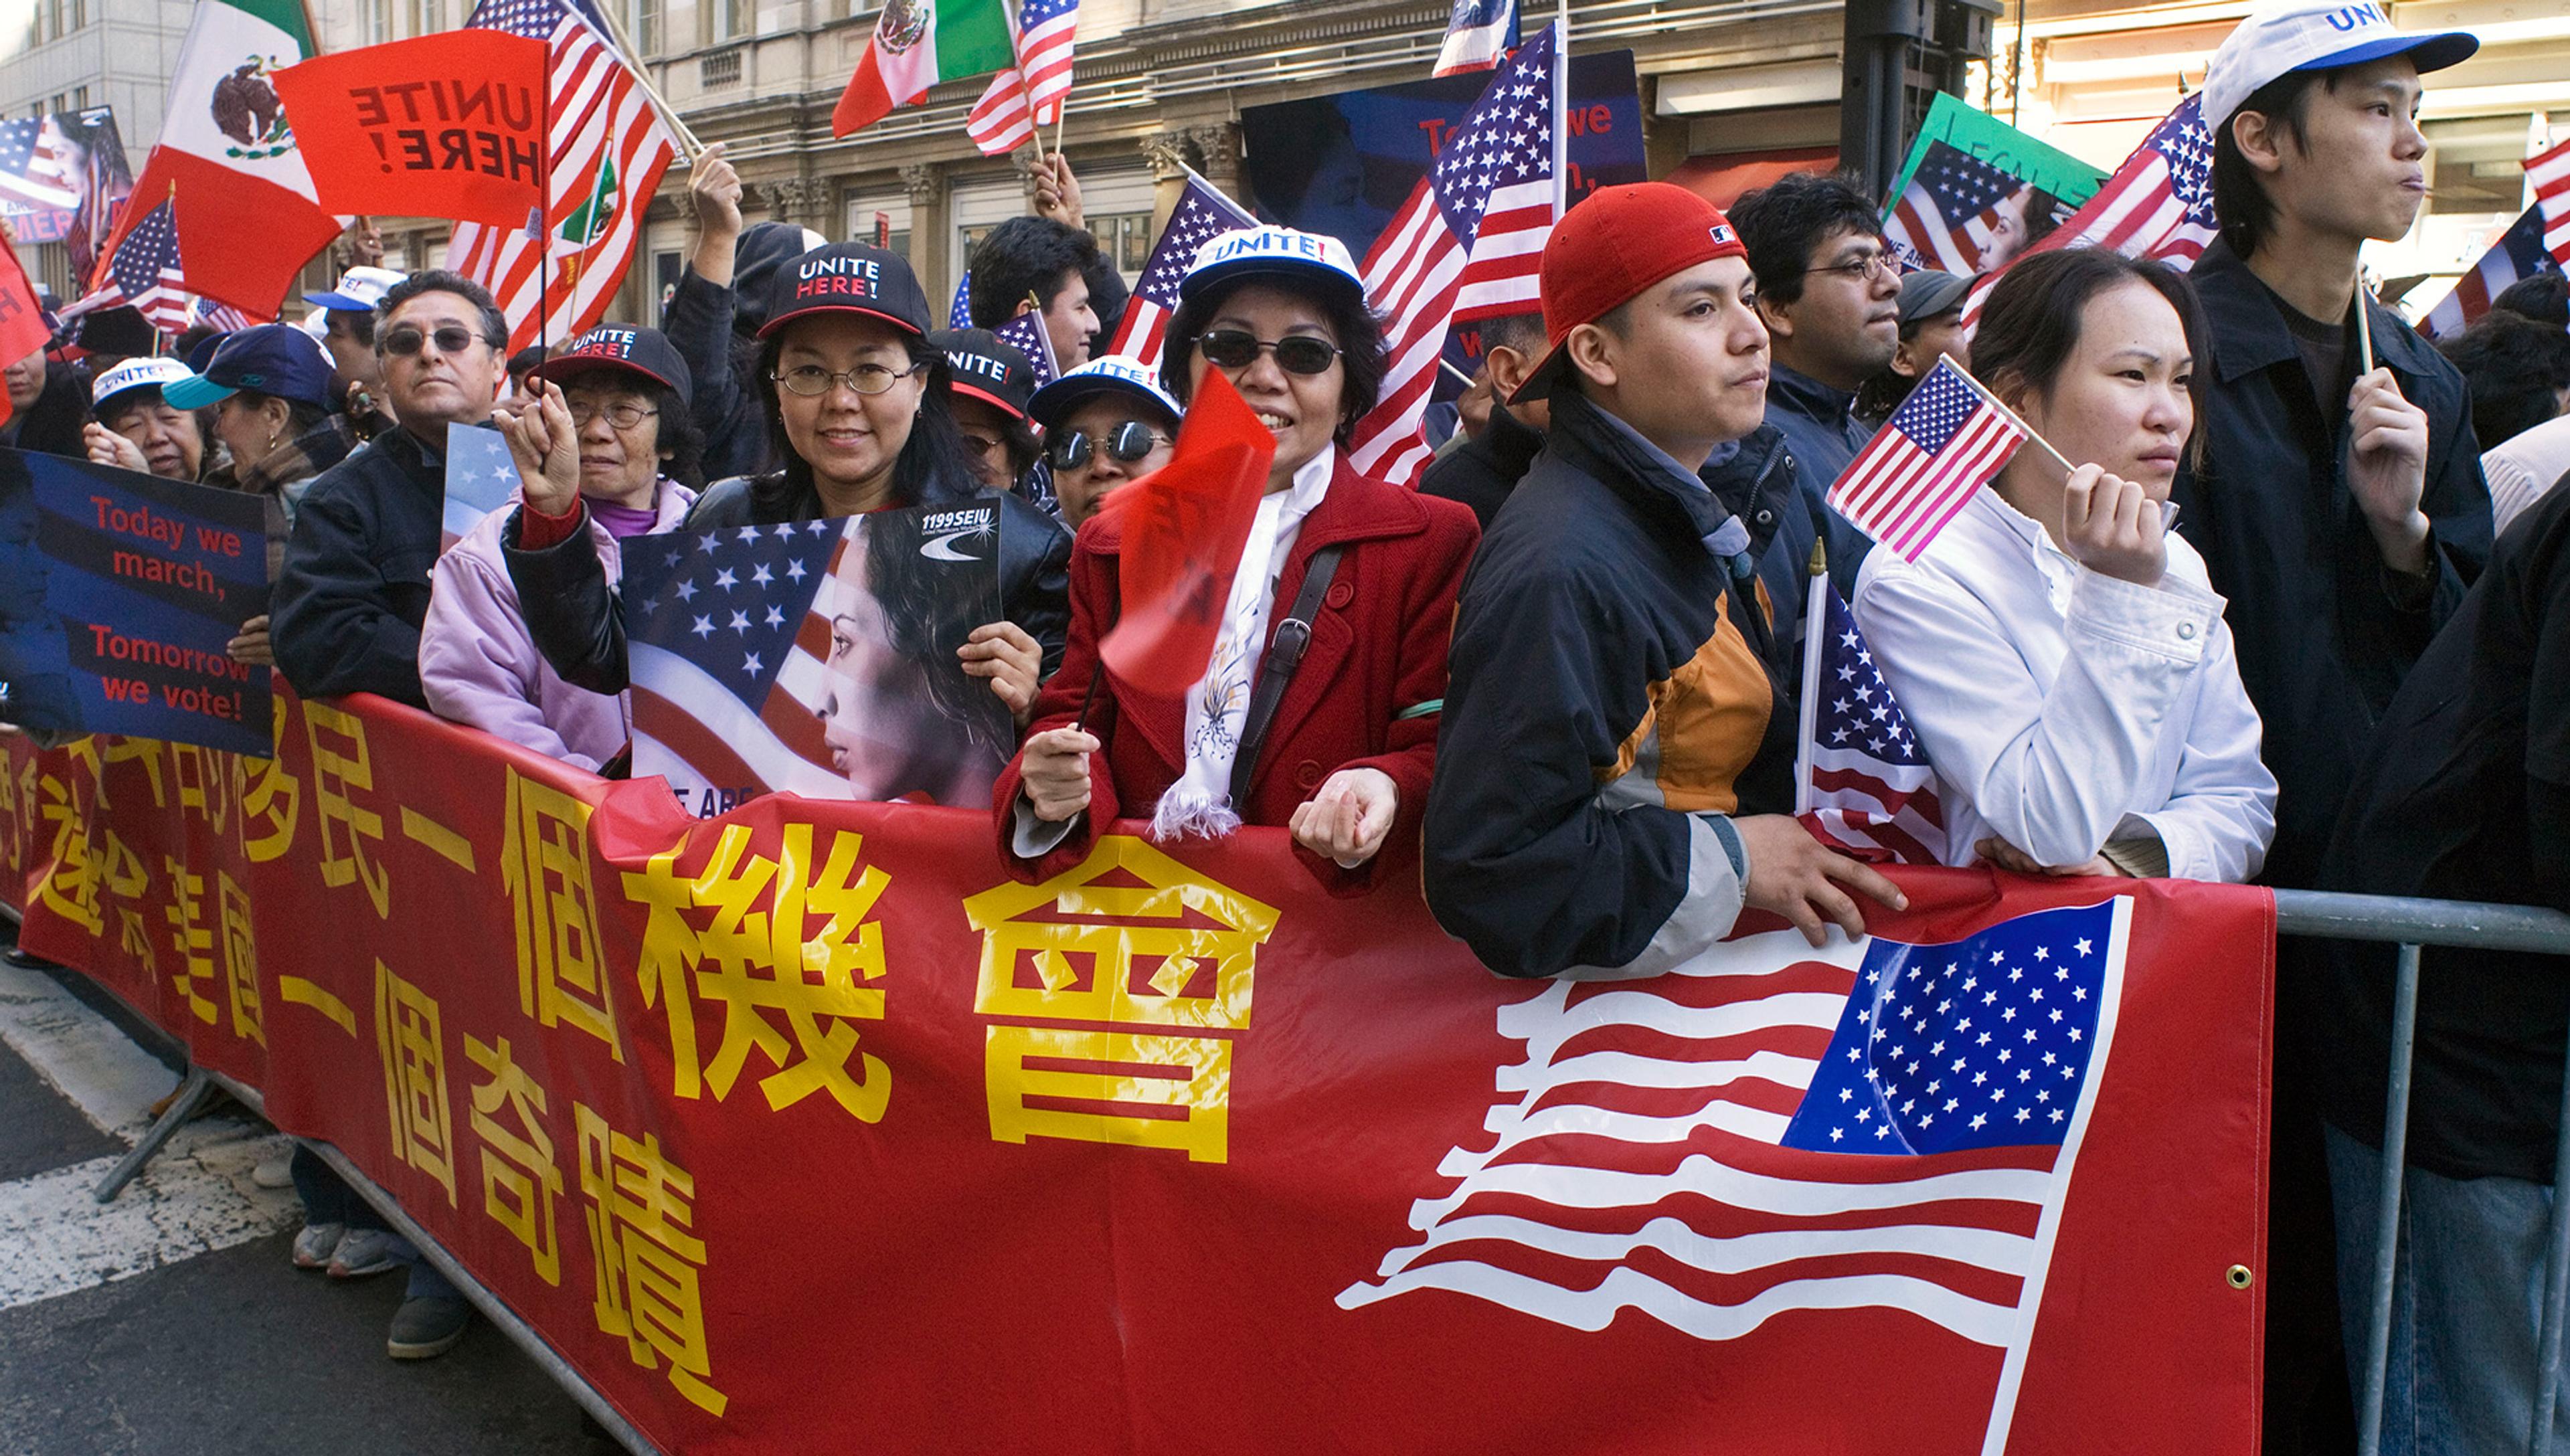 People at a rally holding flags and banners with various languages, advocating for voting rights and unity, standing behind a barrier on a city street.